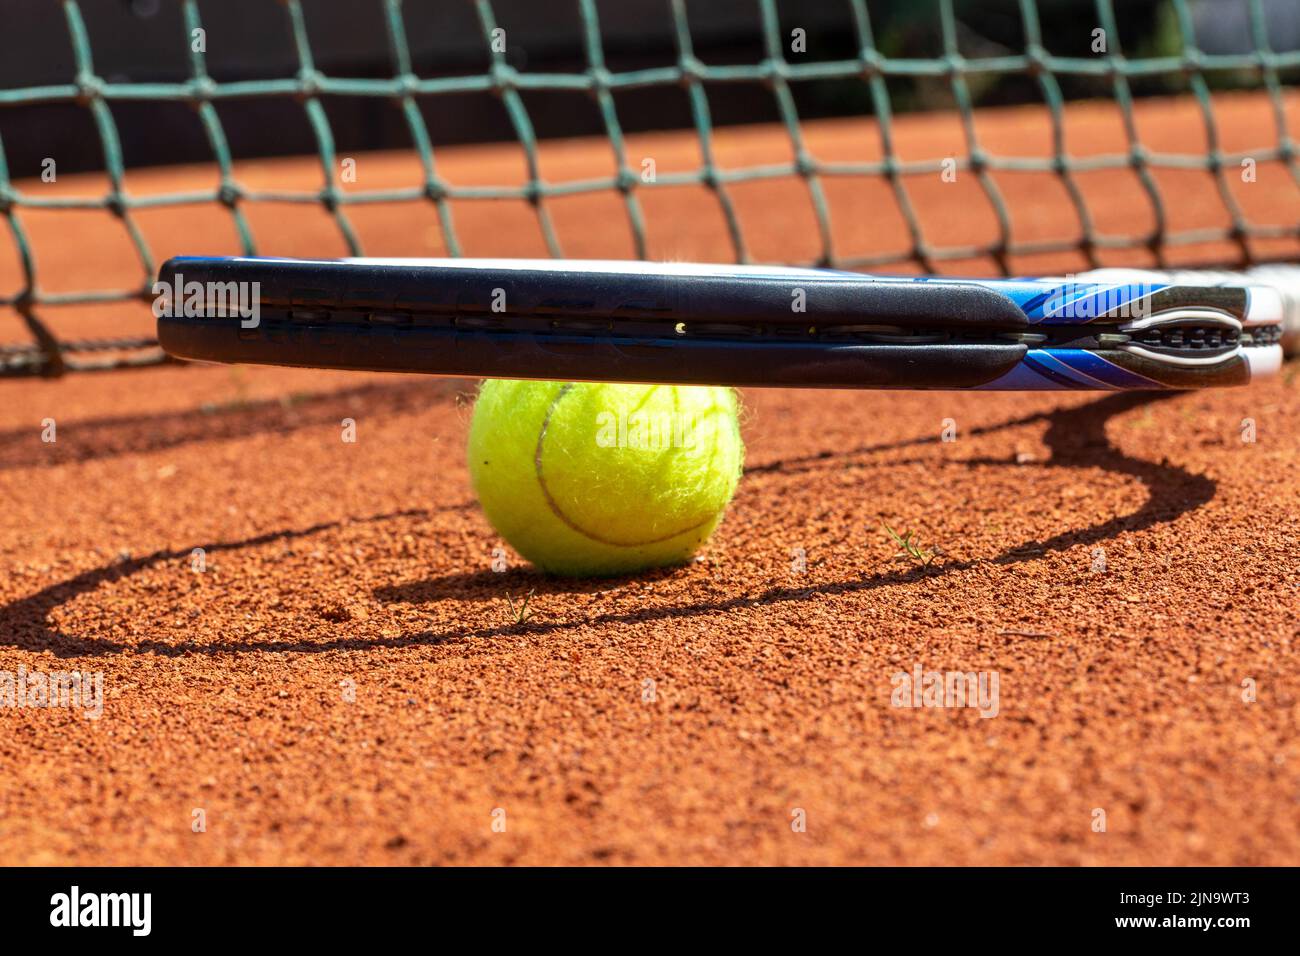 Symbol image tennis: Close-up of a tennis ball and tennis racket on a clay court Stock Photo